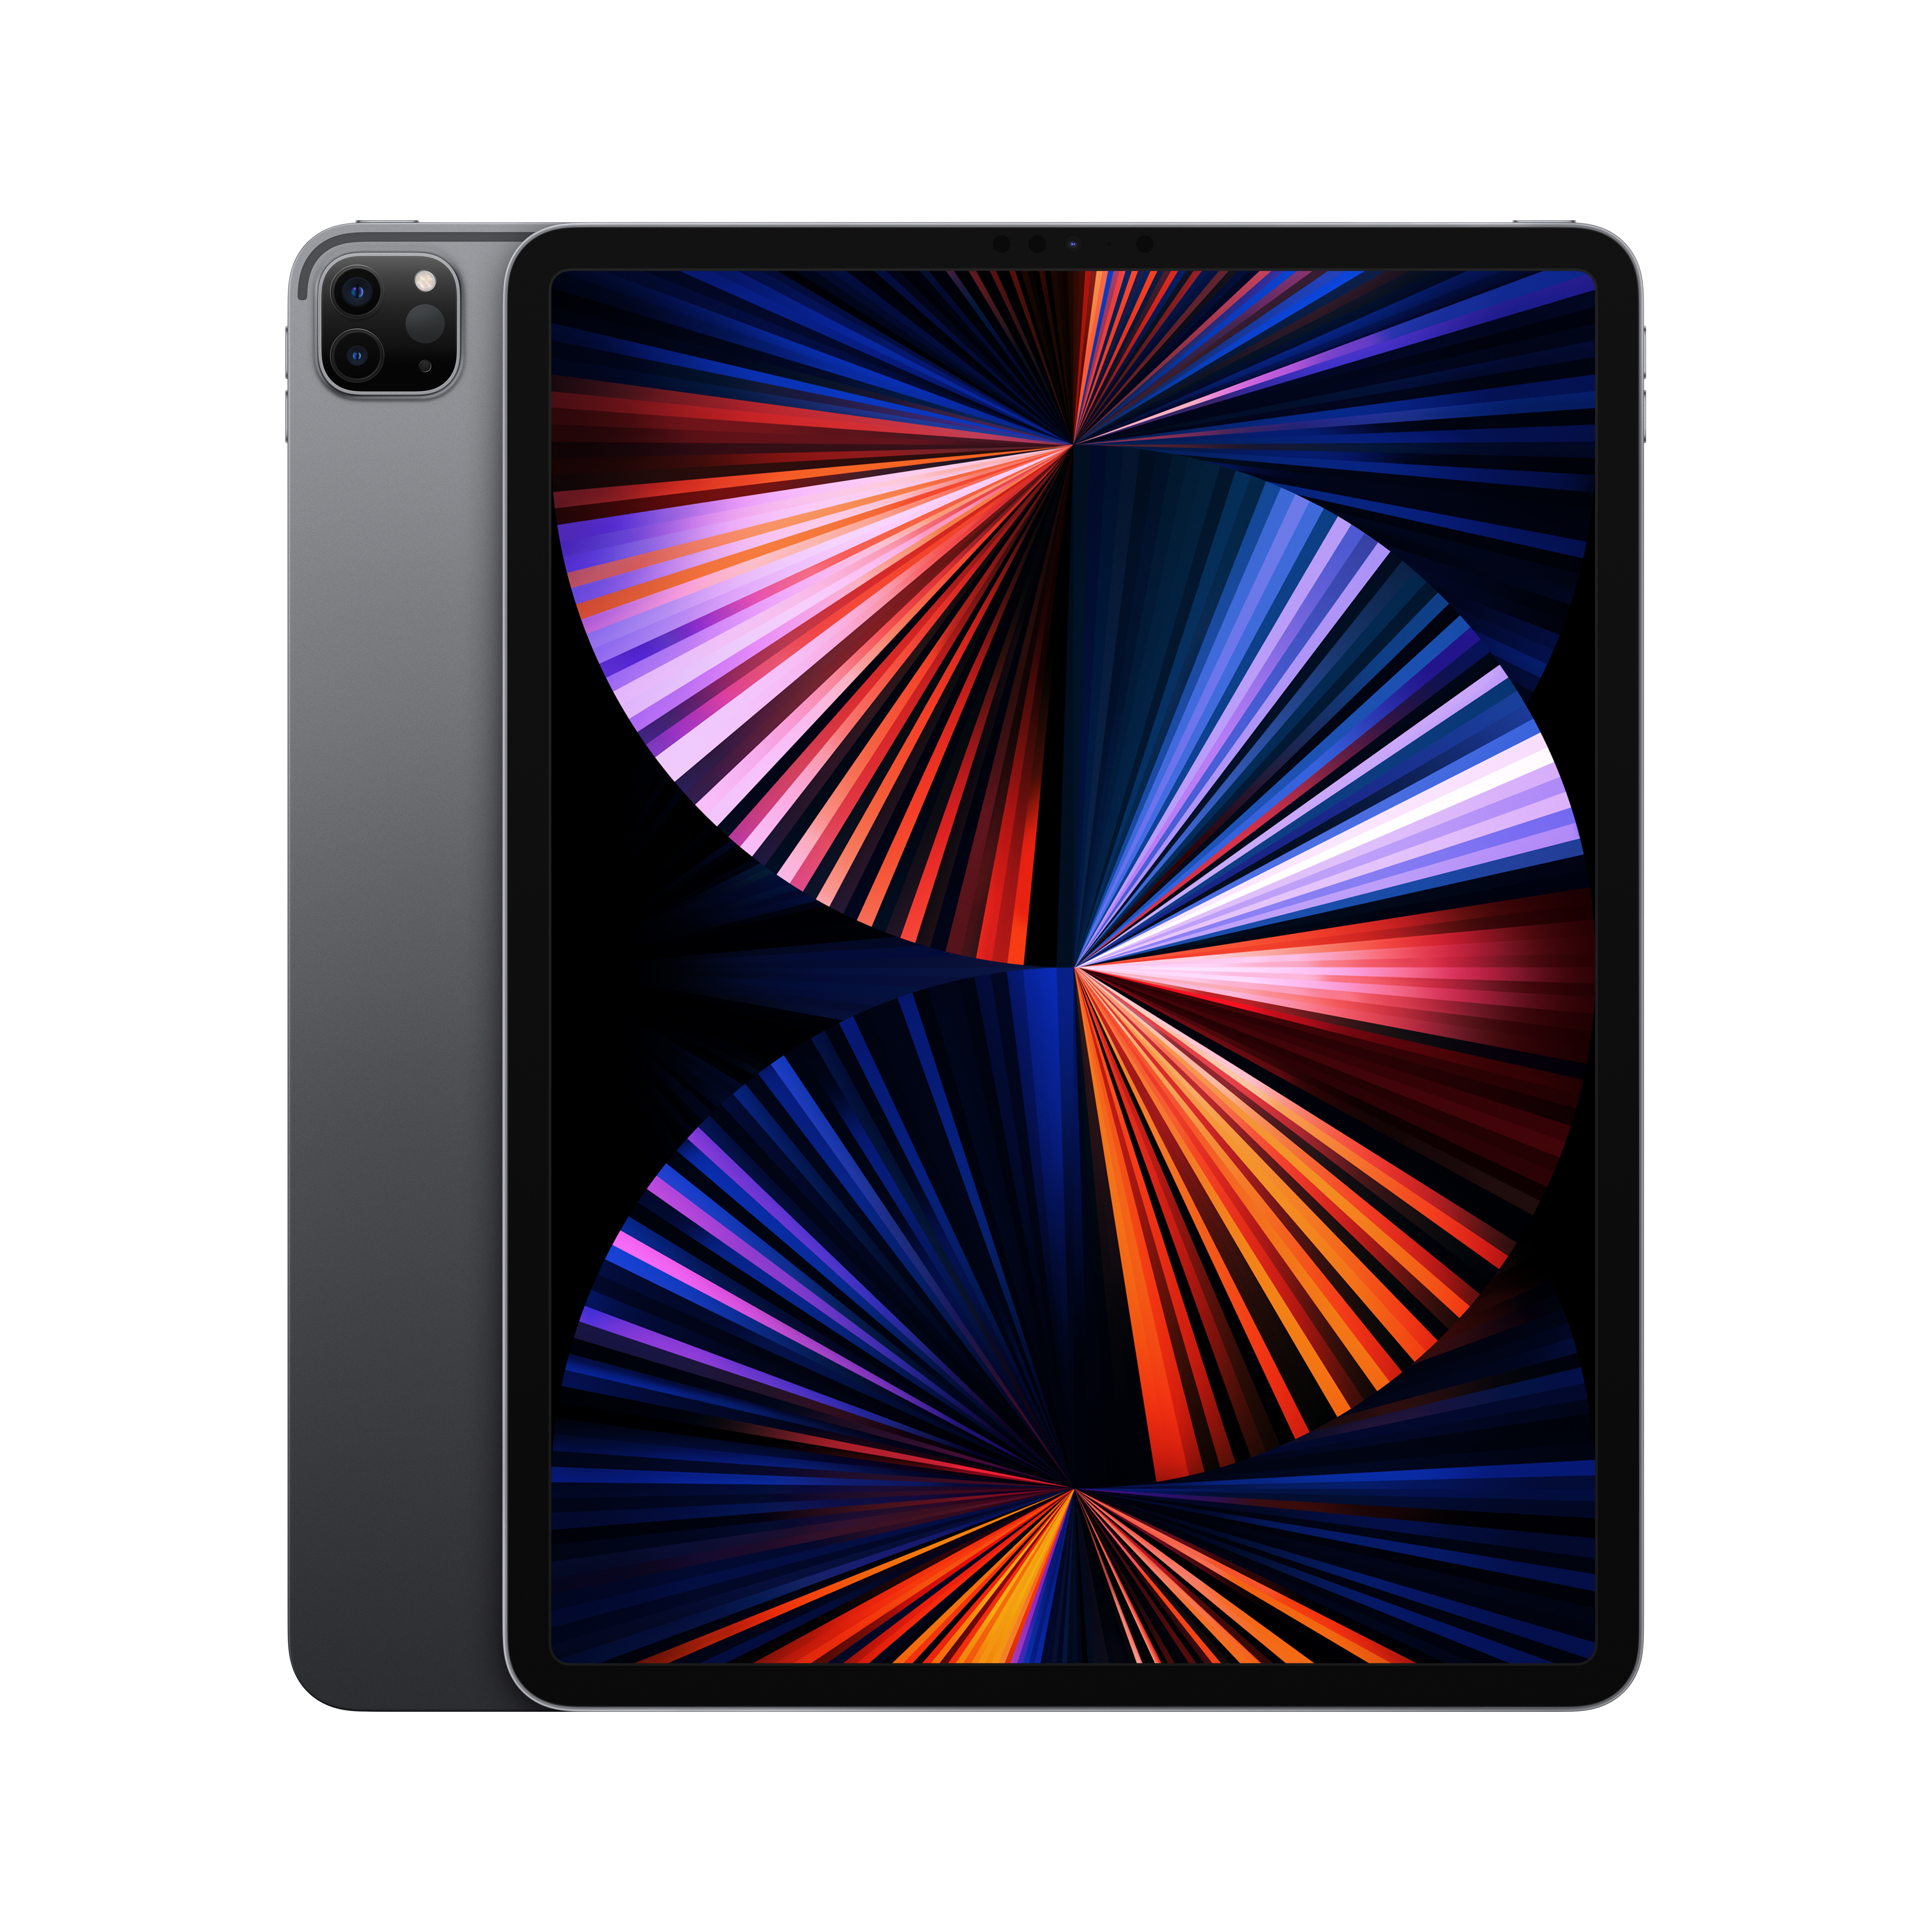 2021 Apple 12.9-inch iPad Pro Wi-Fi + Cellular 128GB - Space Gray (5th Generation) - image 1 of 9